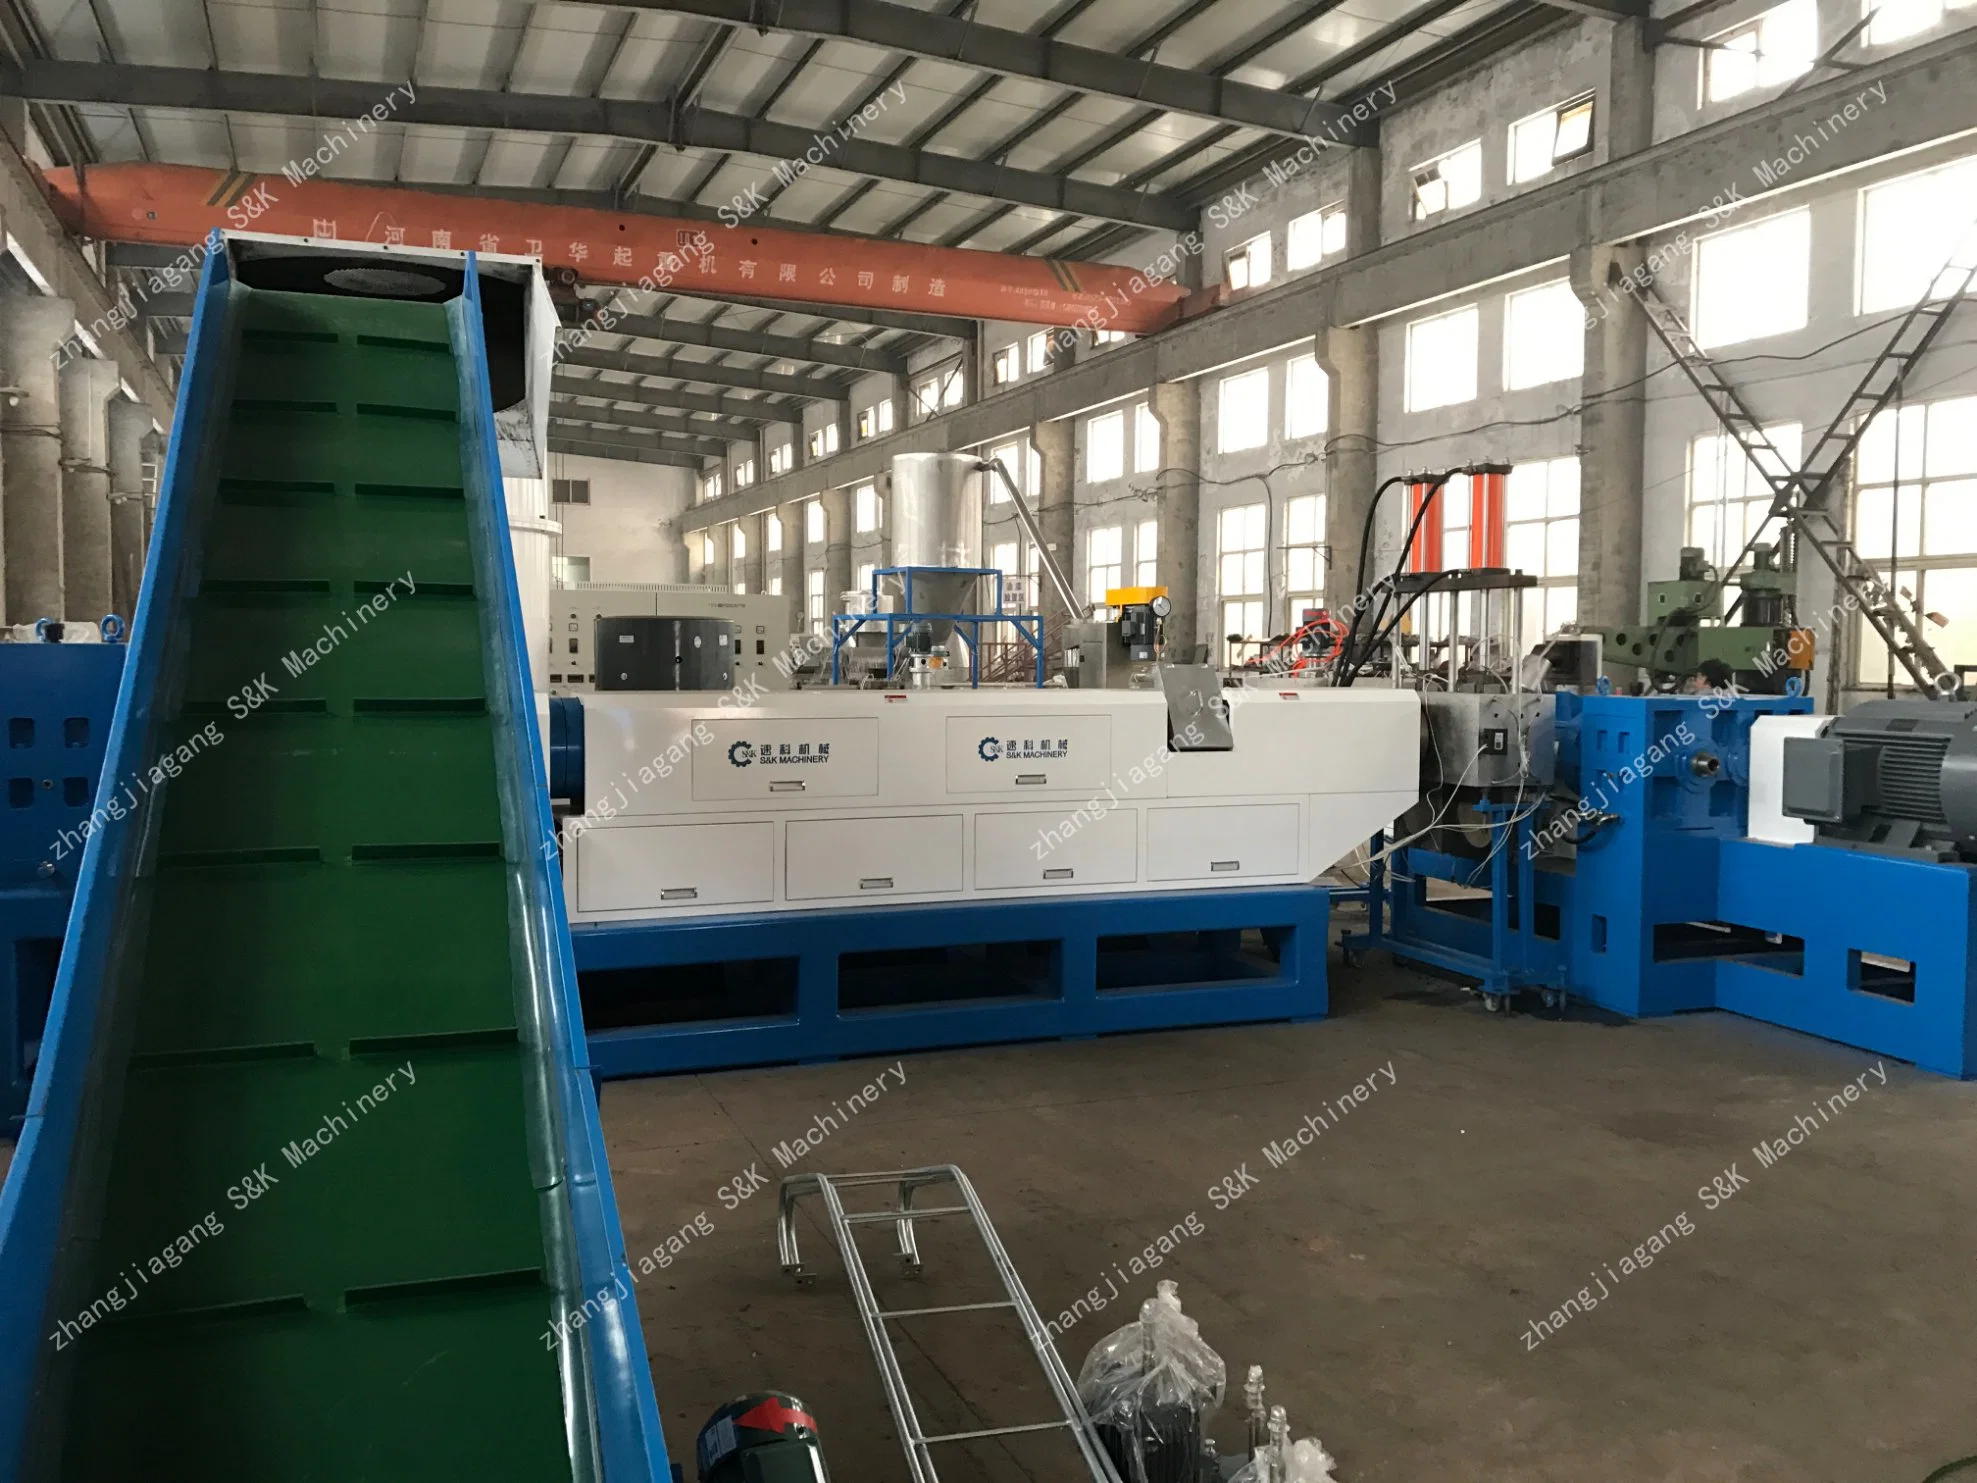 PP Polypropylene Woven Bags Packaging Boxes Basket Flakes Suqeezing Pellets Pelletizing Pelletizer Extruding Extruders Extrusion Machine for Sell